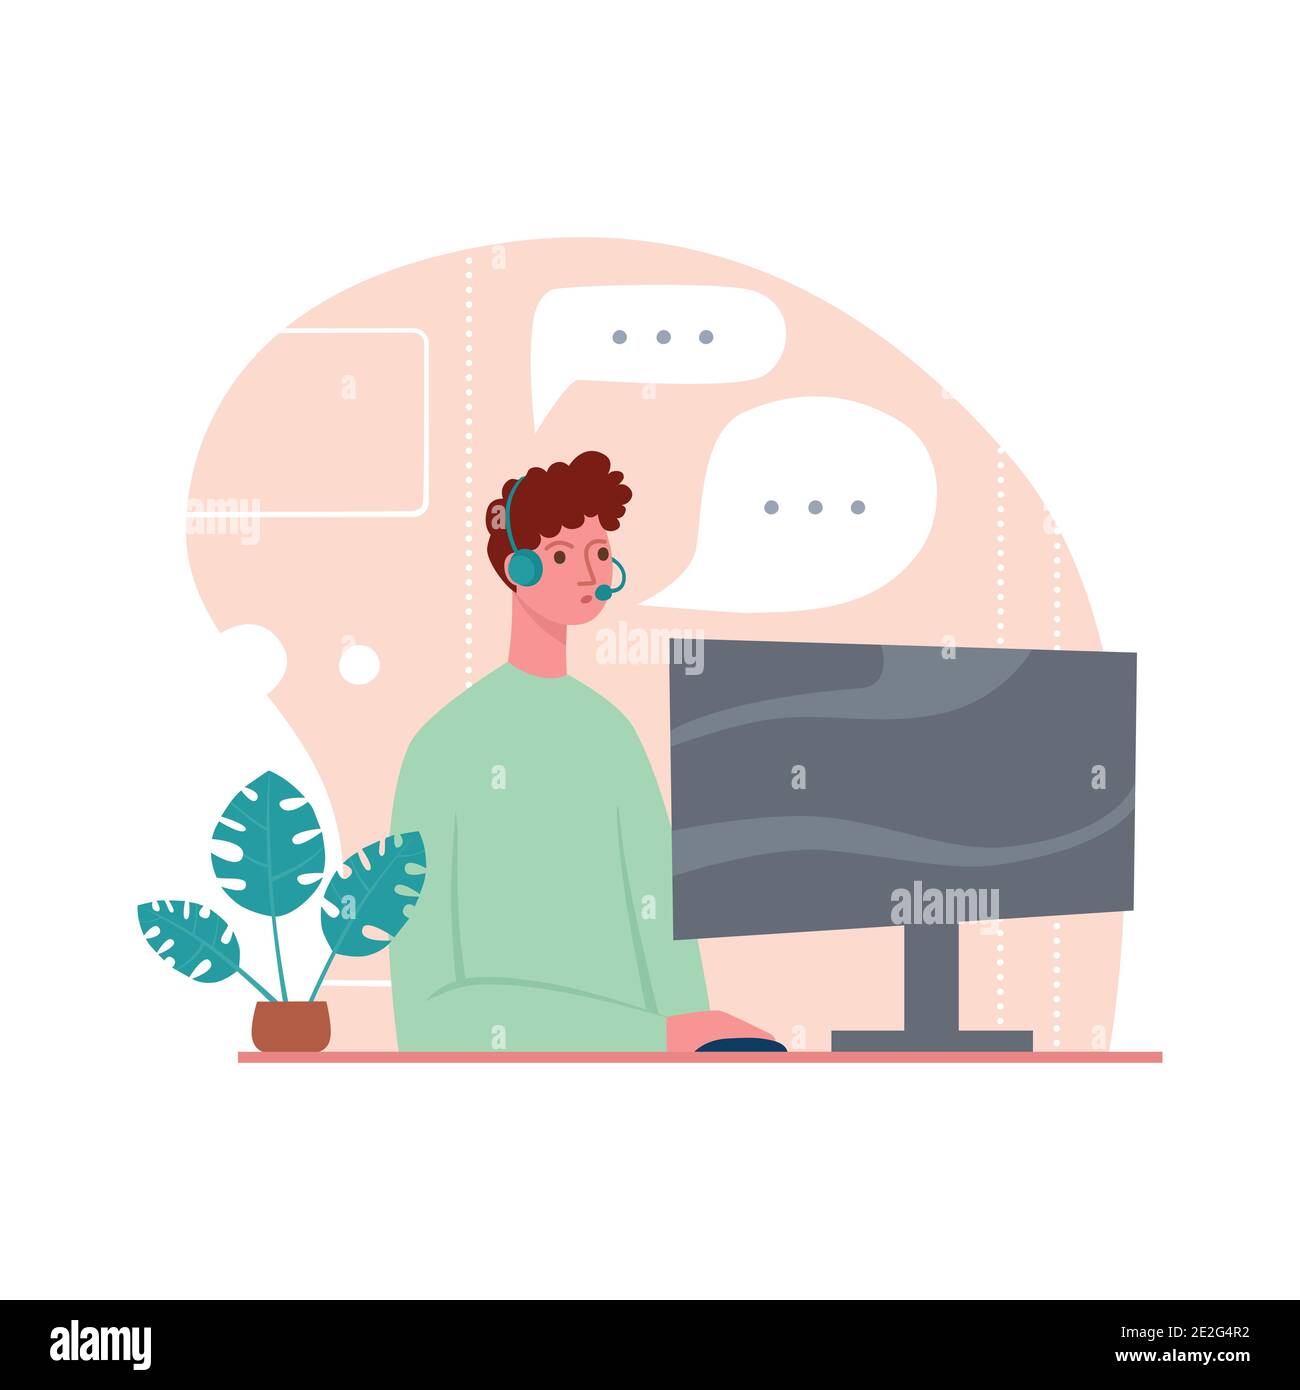 Flat design concept of online education, training and courses, learning, video tutorials. Vector illustration for website banner, marketing material Stock Vector